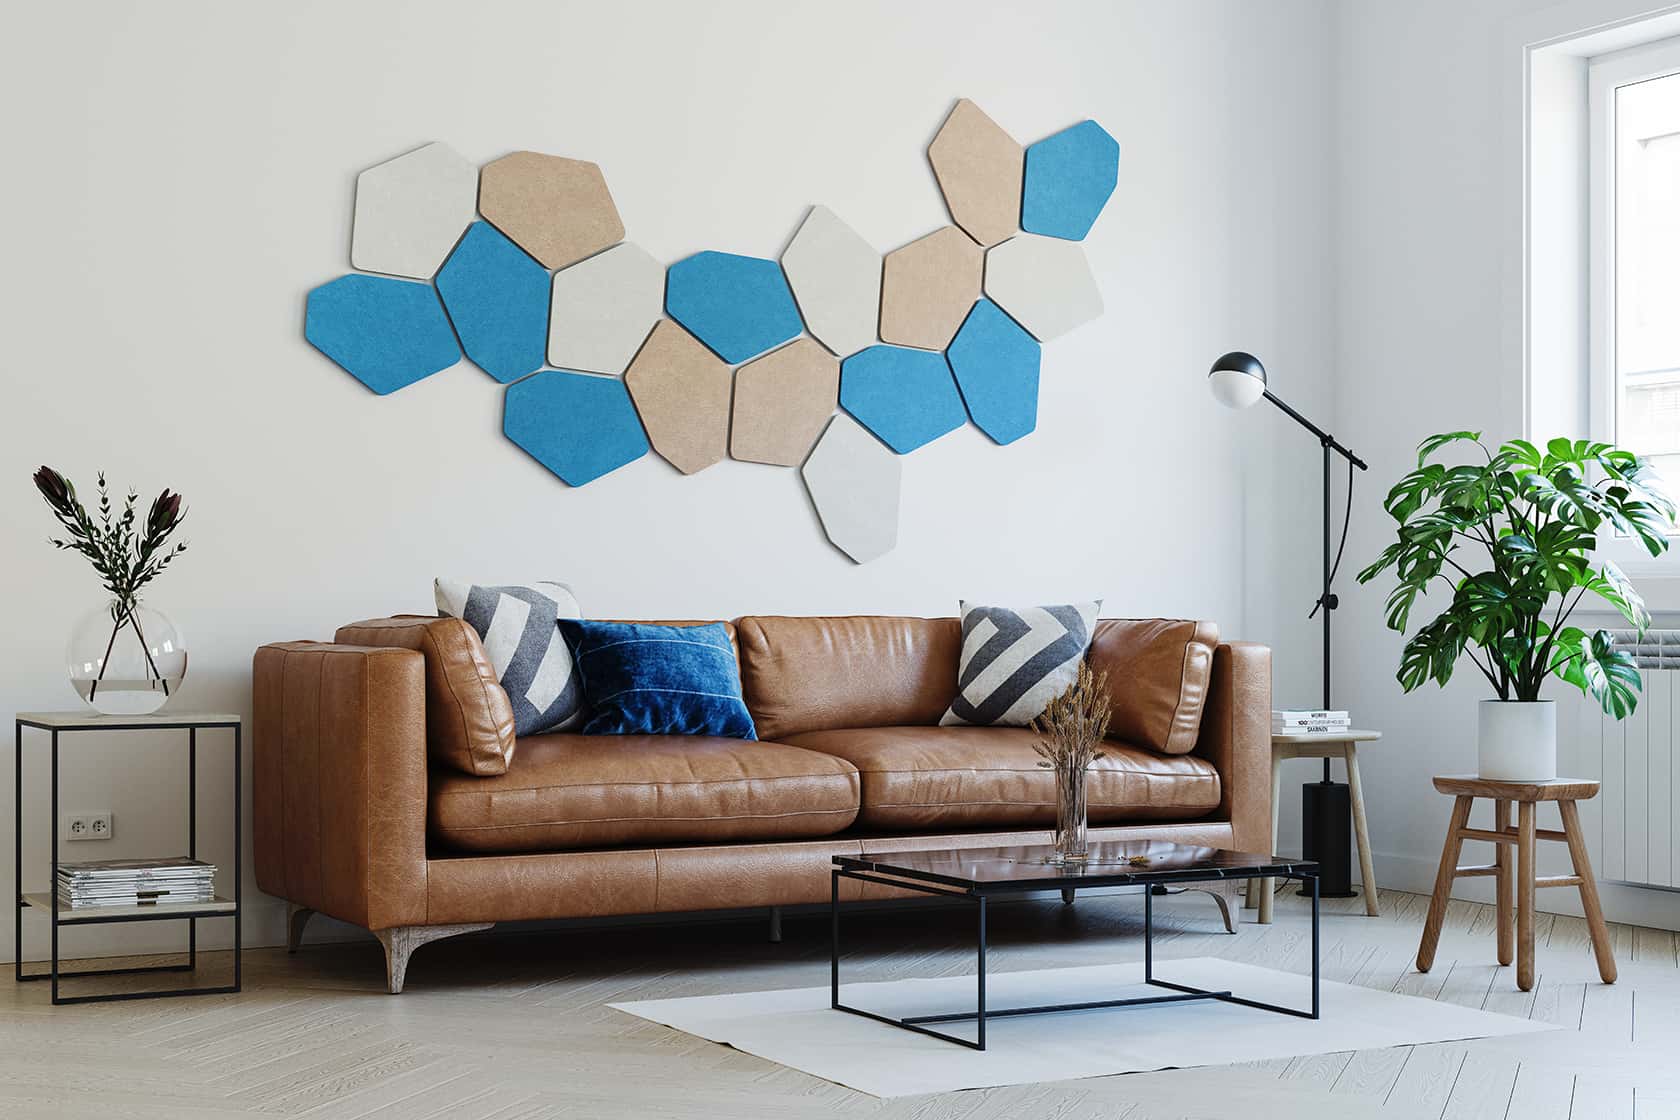 A living room with blue acoustic panels.